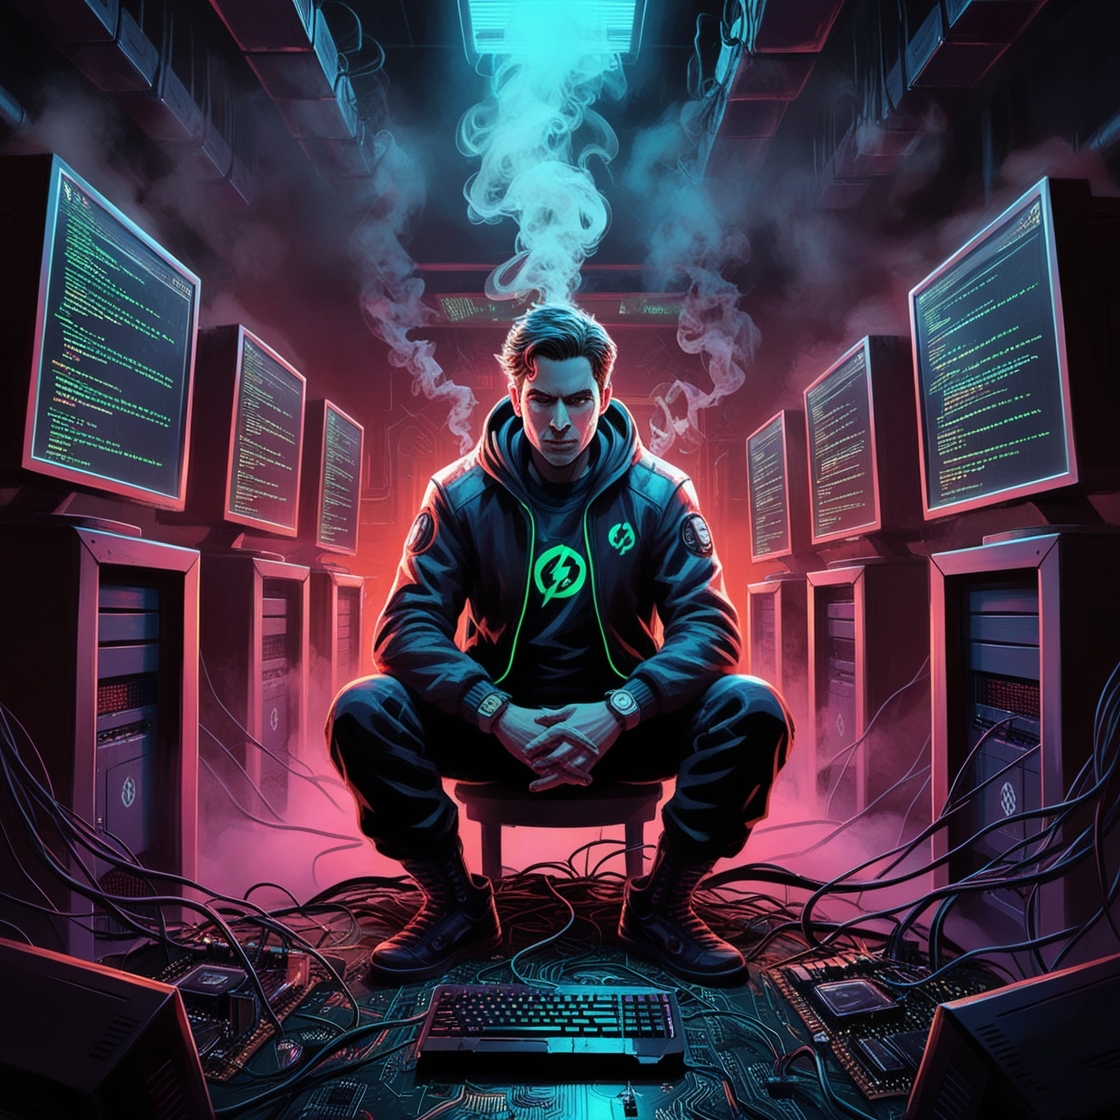 A futuristic hacker, bathed in a warm, neon-lit glow, sitting in a dark, smoke-filled room surrounded by rows of humming computer towers, amidst a tangled web of wires and circuit boards, with screens displaying lines of rapid-fire code, rendered in a stylized, illustrative digital art style, evoking a sense of high-stakes tension and technological anxiety, with a color palette of deep blues, electric greens, and fiery oranges, hinting at the protagonist's masterful control over the virtual world.